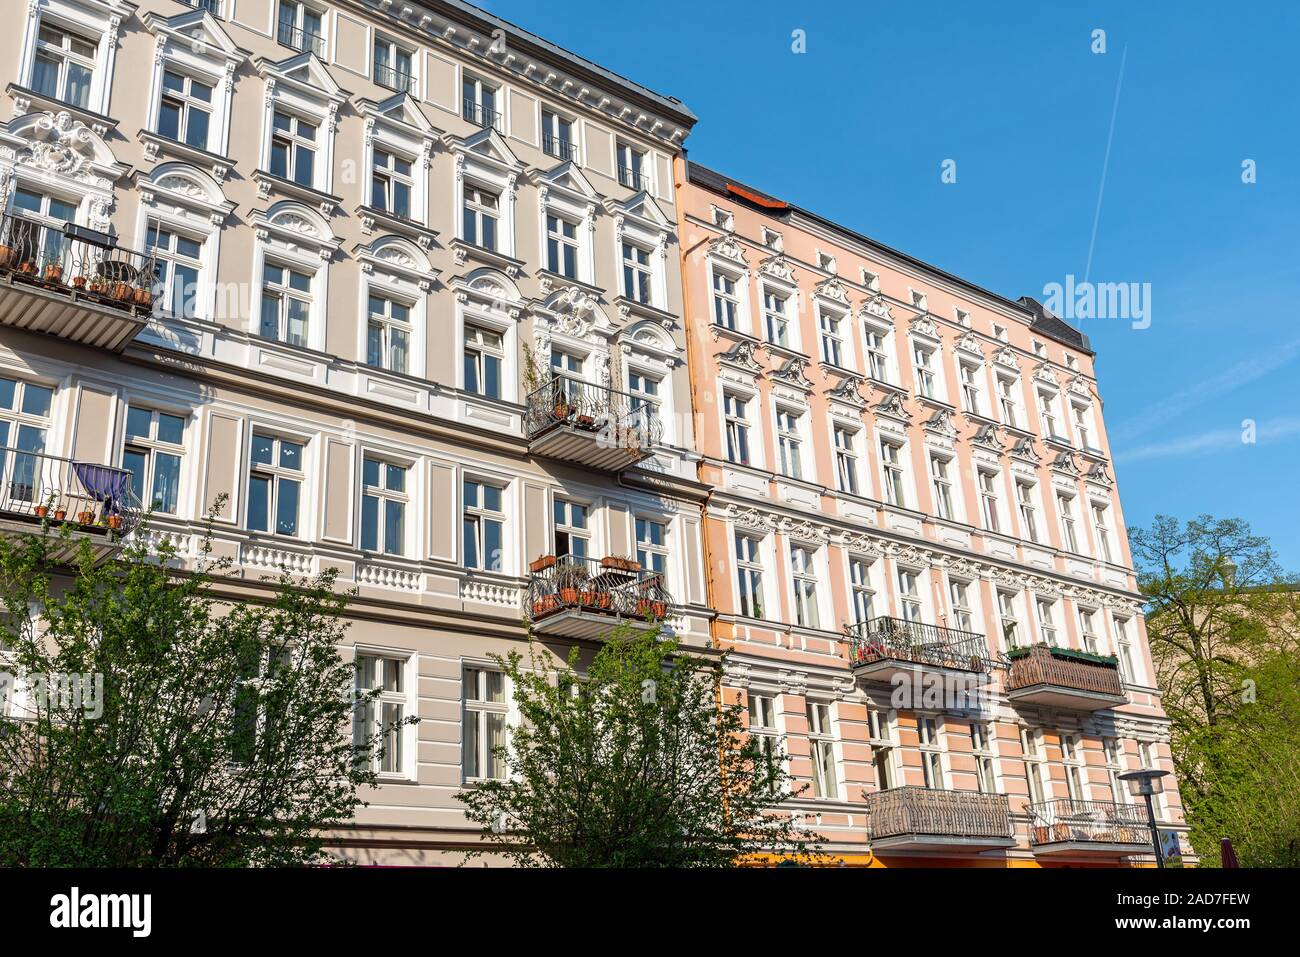 Beautiful restored old residential construction seen at the Prenzlauer Berg district in Berlin, Germ Stock Photo